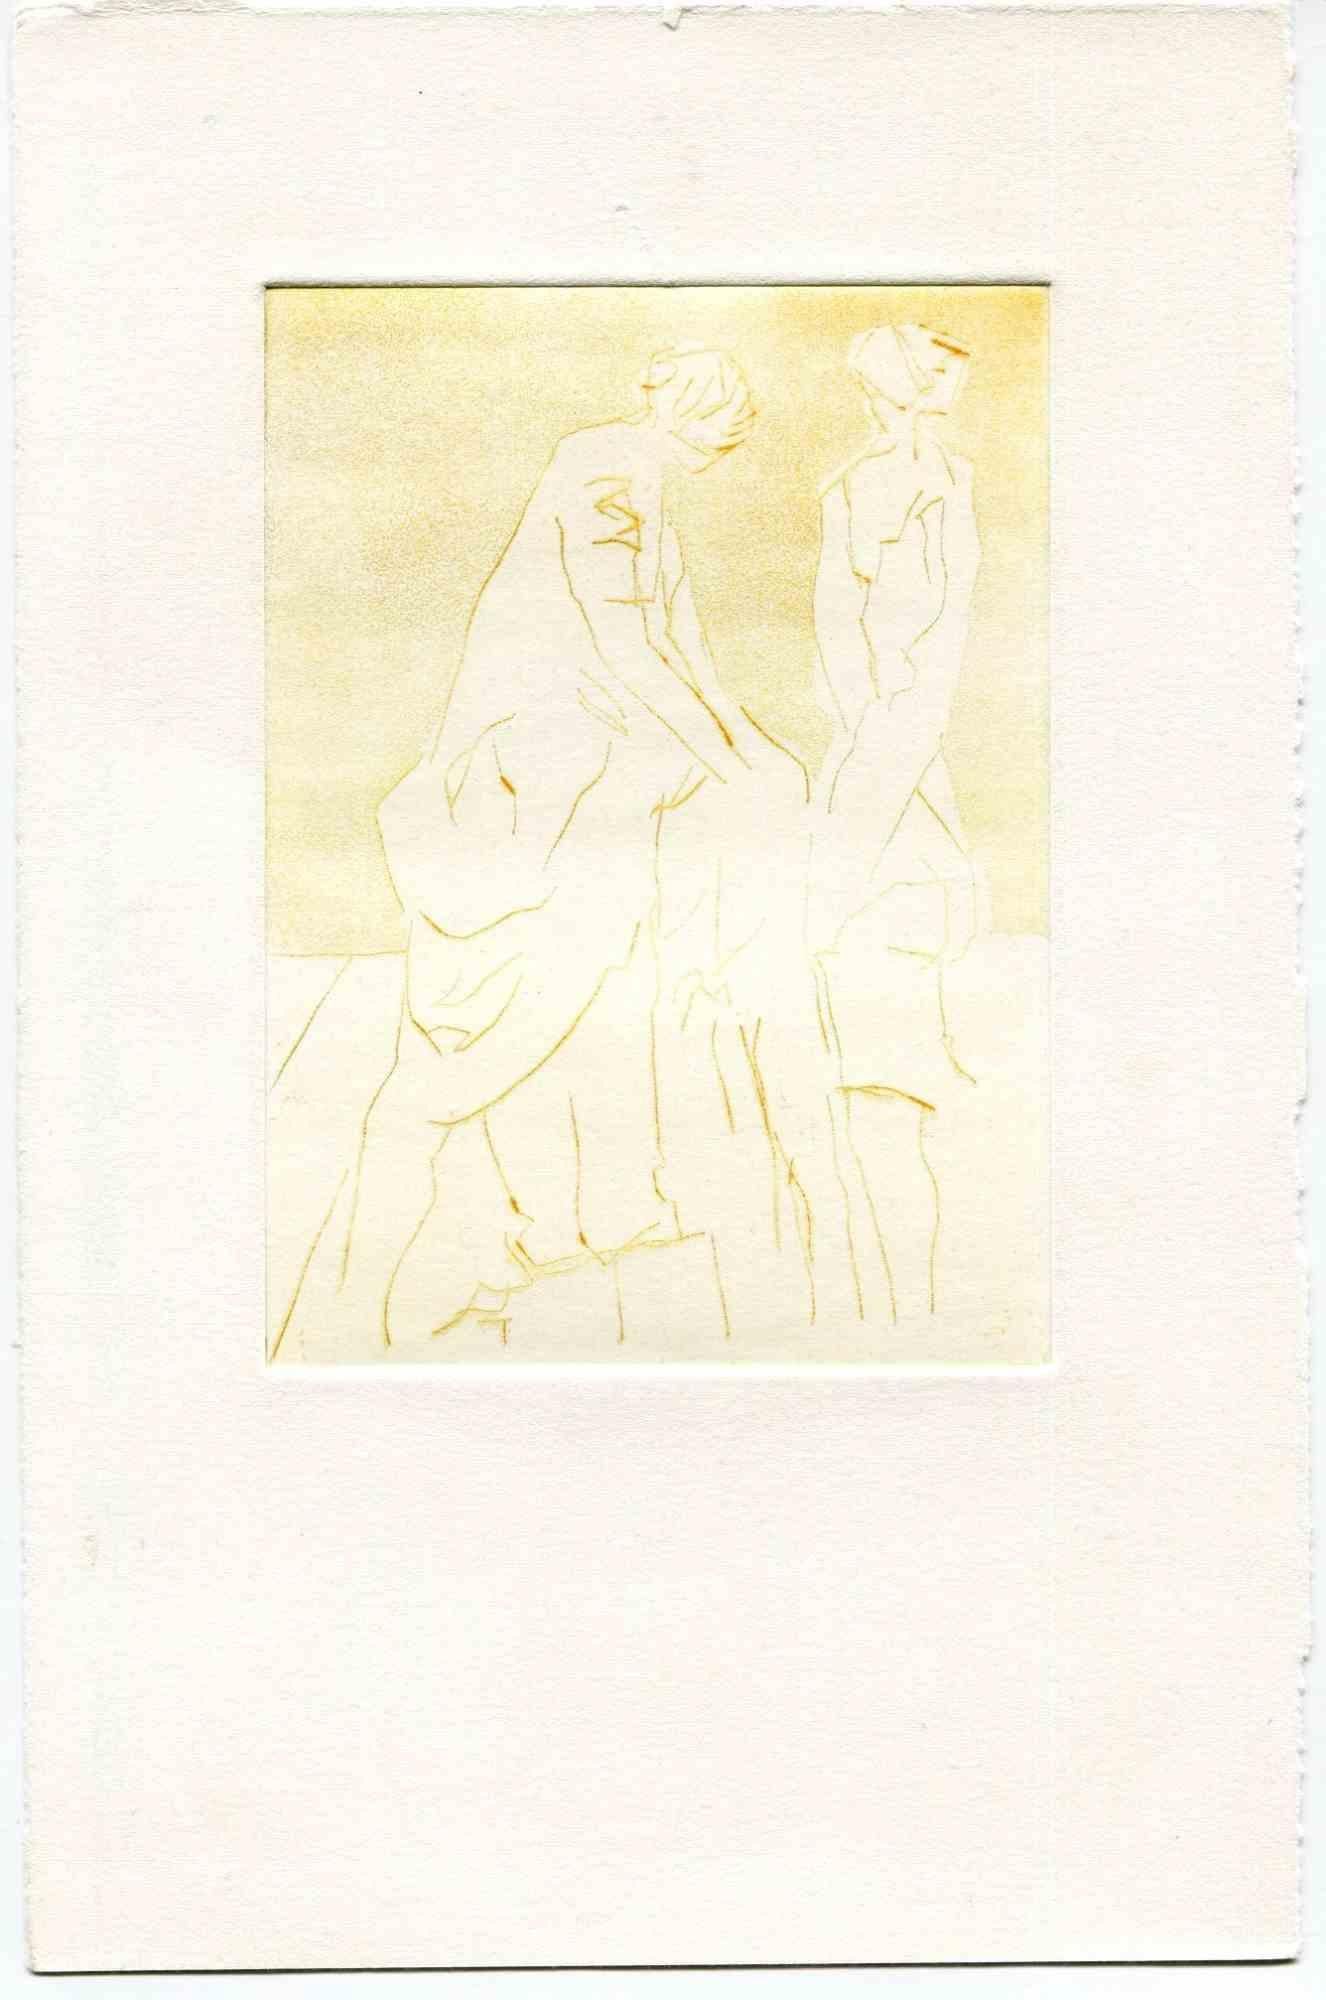 Unknown Figurative Print - Posing Models - Original Etching and Drypoint - Mid-20th Century